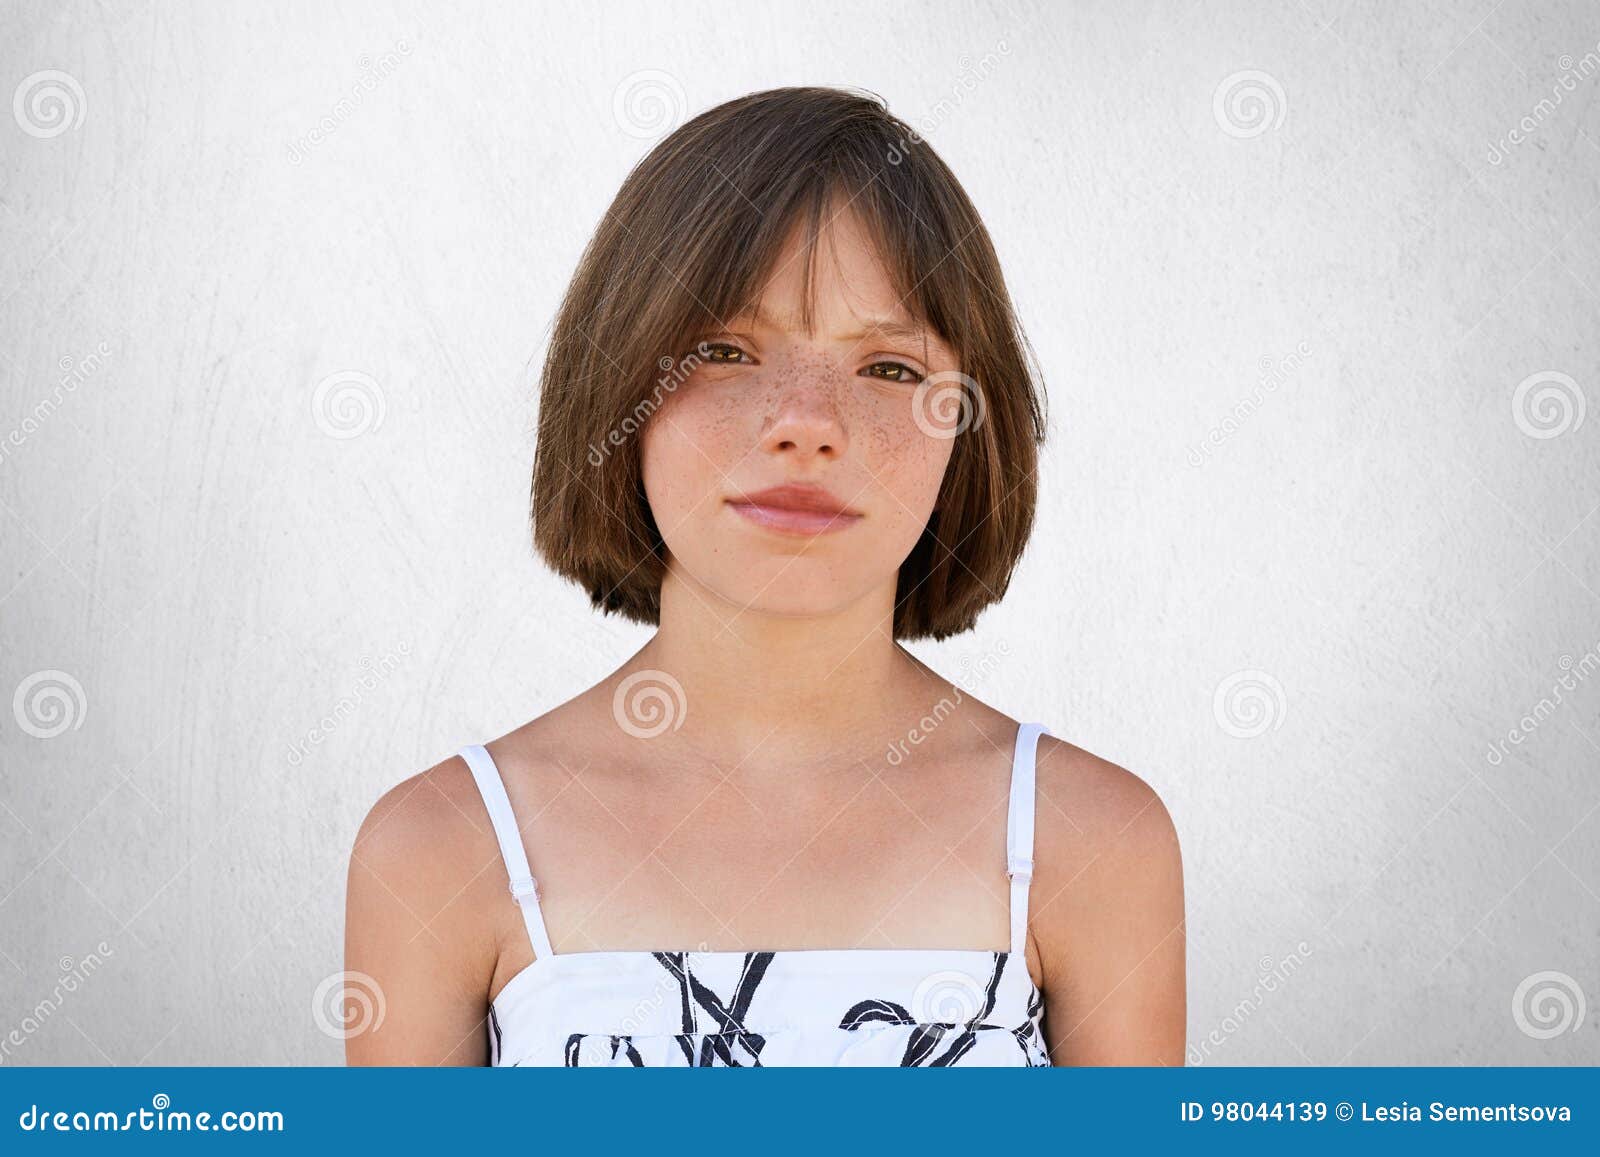 freckled girl with hazel eyes and dark short hair, looking with displeasure into camera while posing against whiye concrete wall.